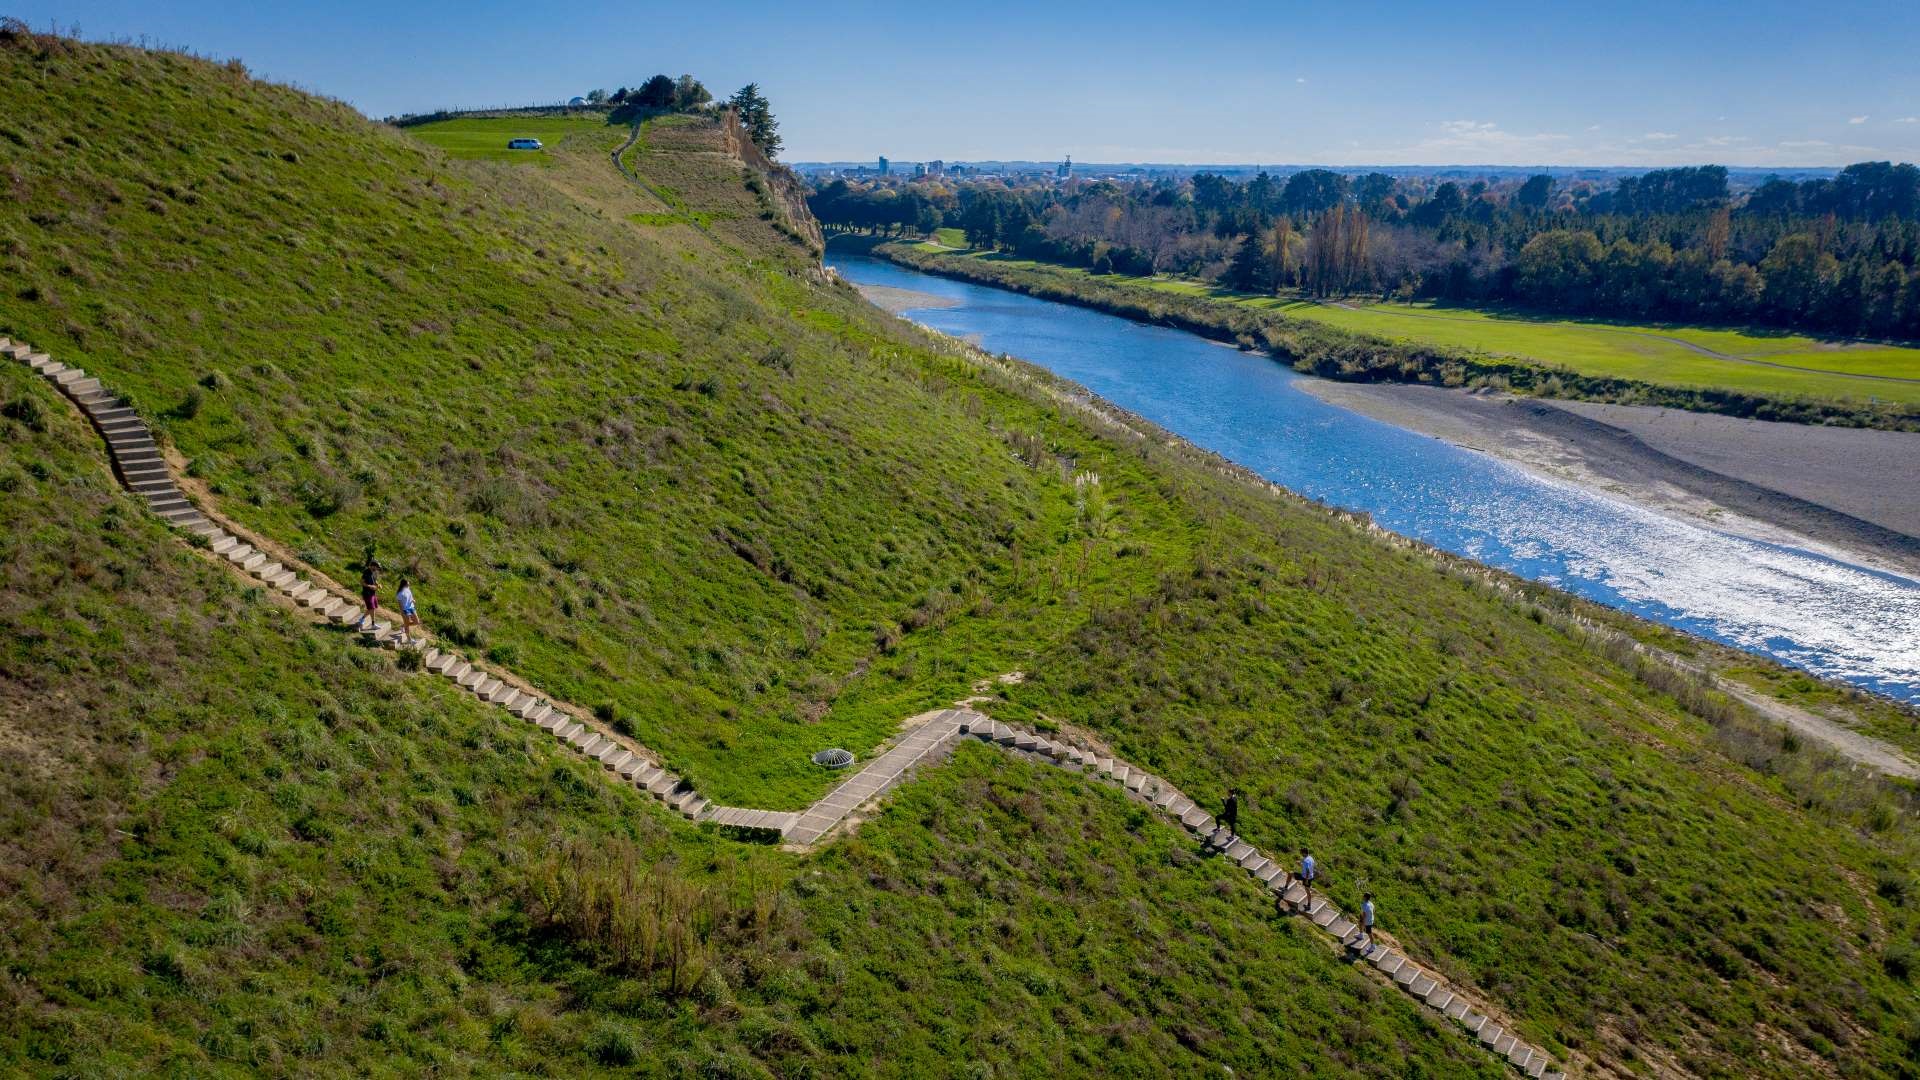 People climbing steep steps zigzagging up a hillside on the bank of the Manawatū River.